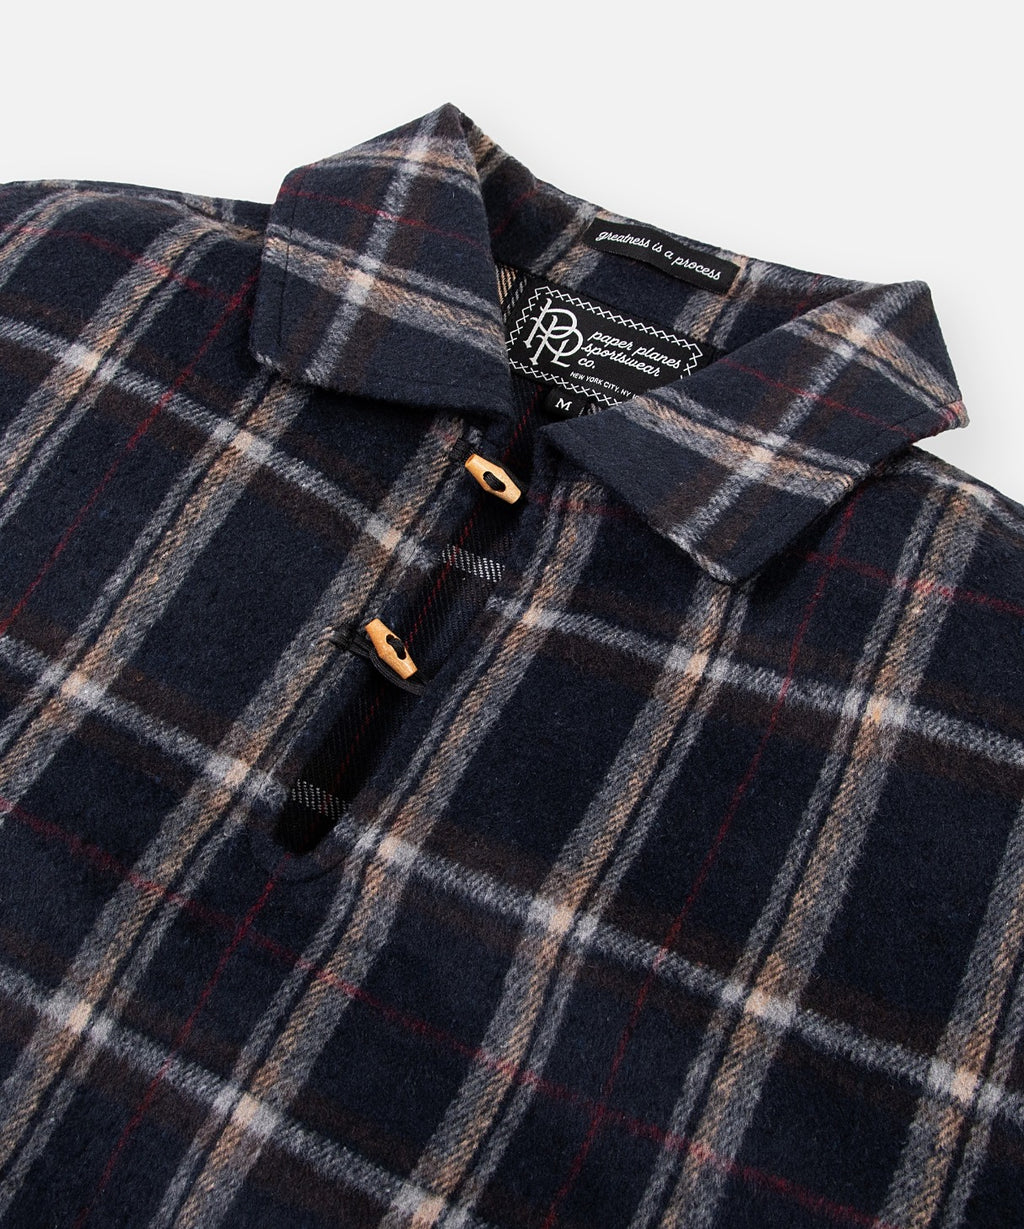  Collar with split neck and wooden toggle closure on Paper Planes Plaid Brushed Flannel Tunic.